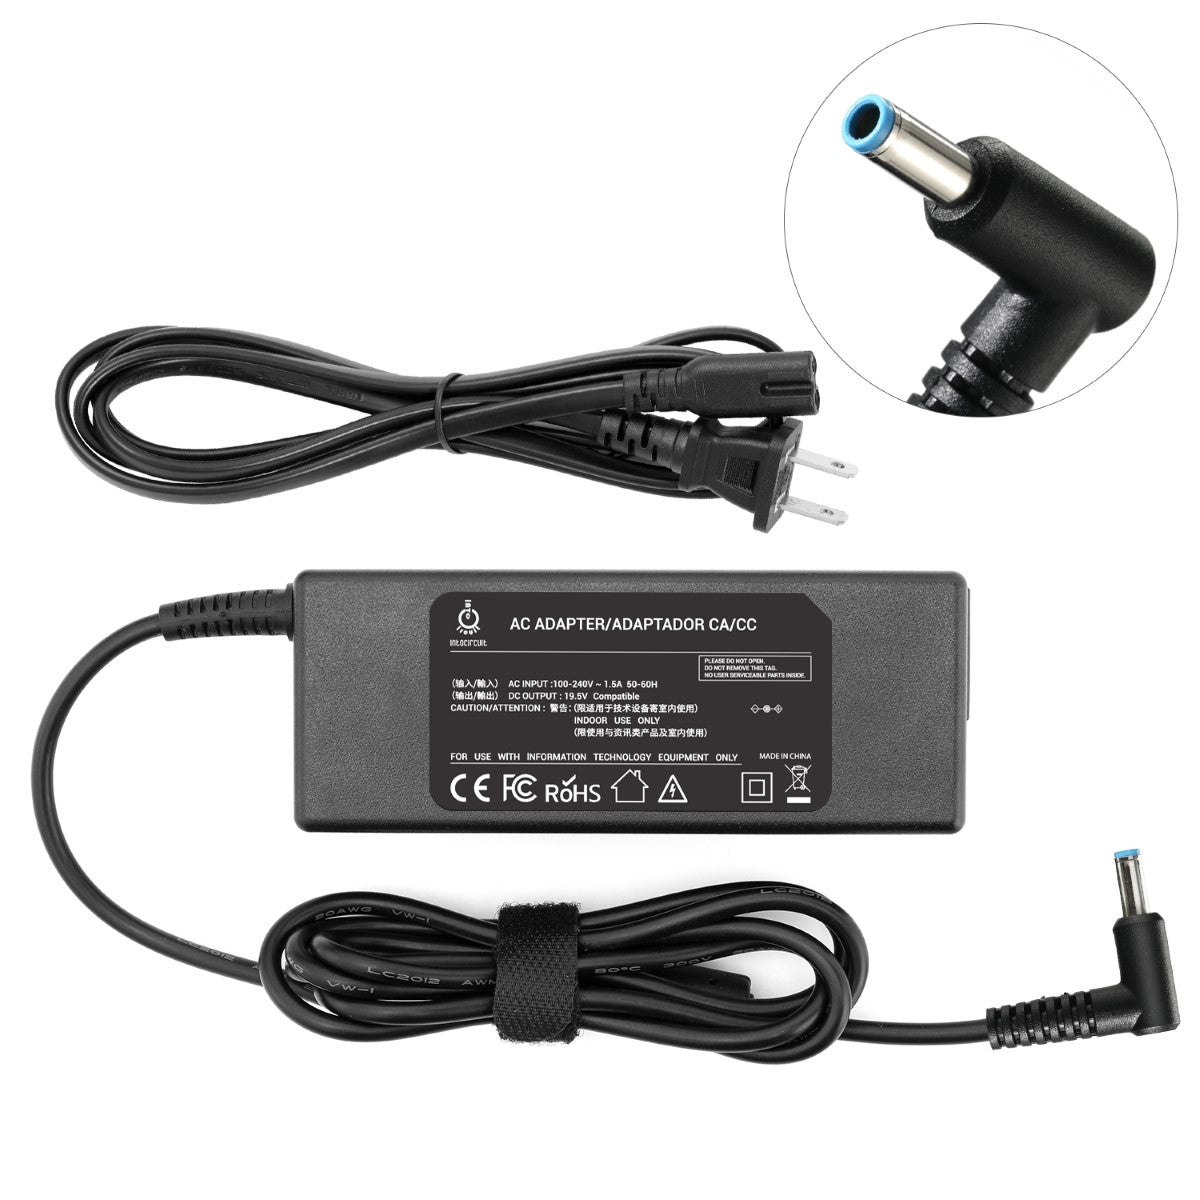 Charger for HP ENVY 15z-ds000 CTO Convertible Laptop